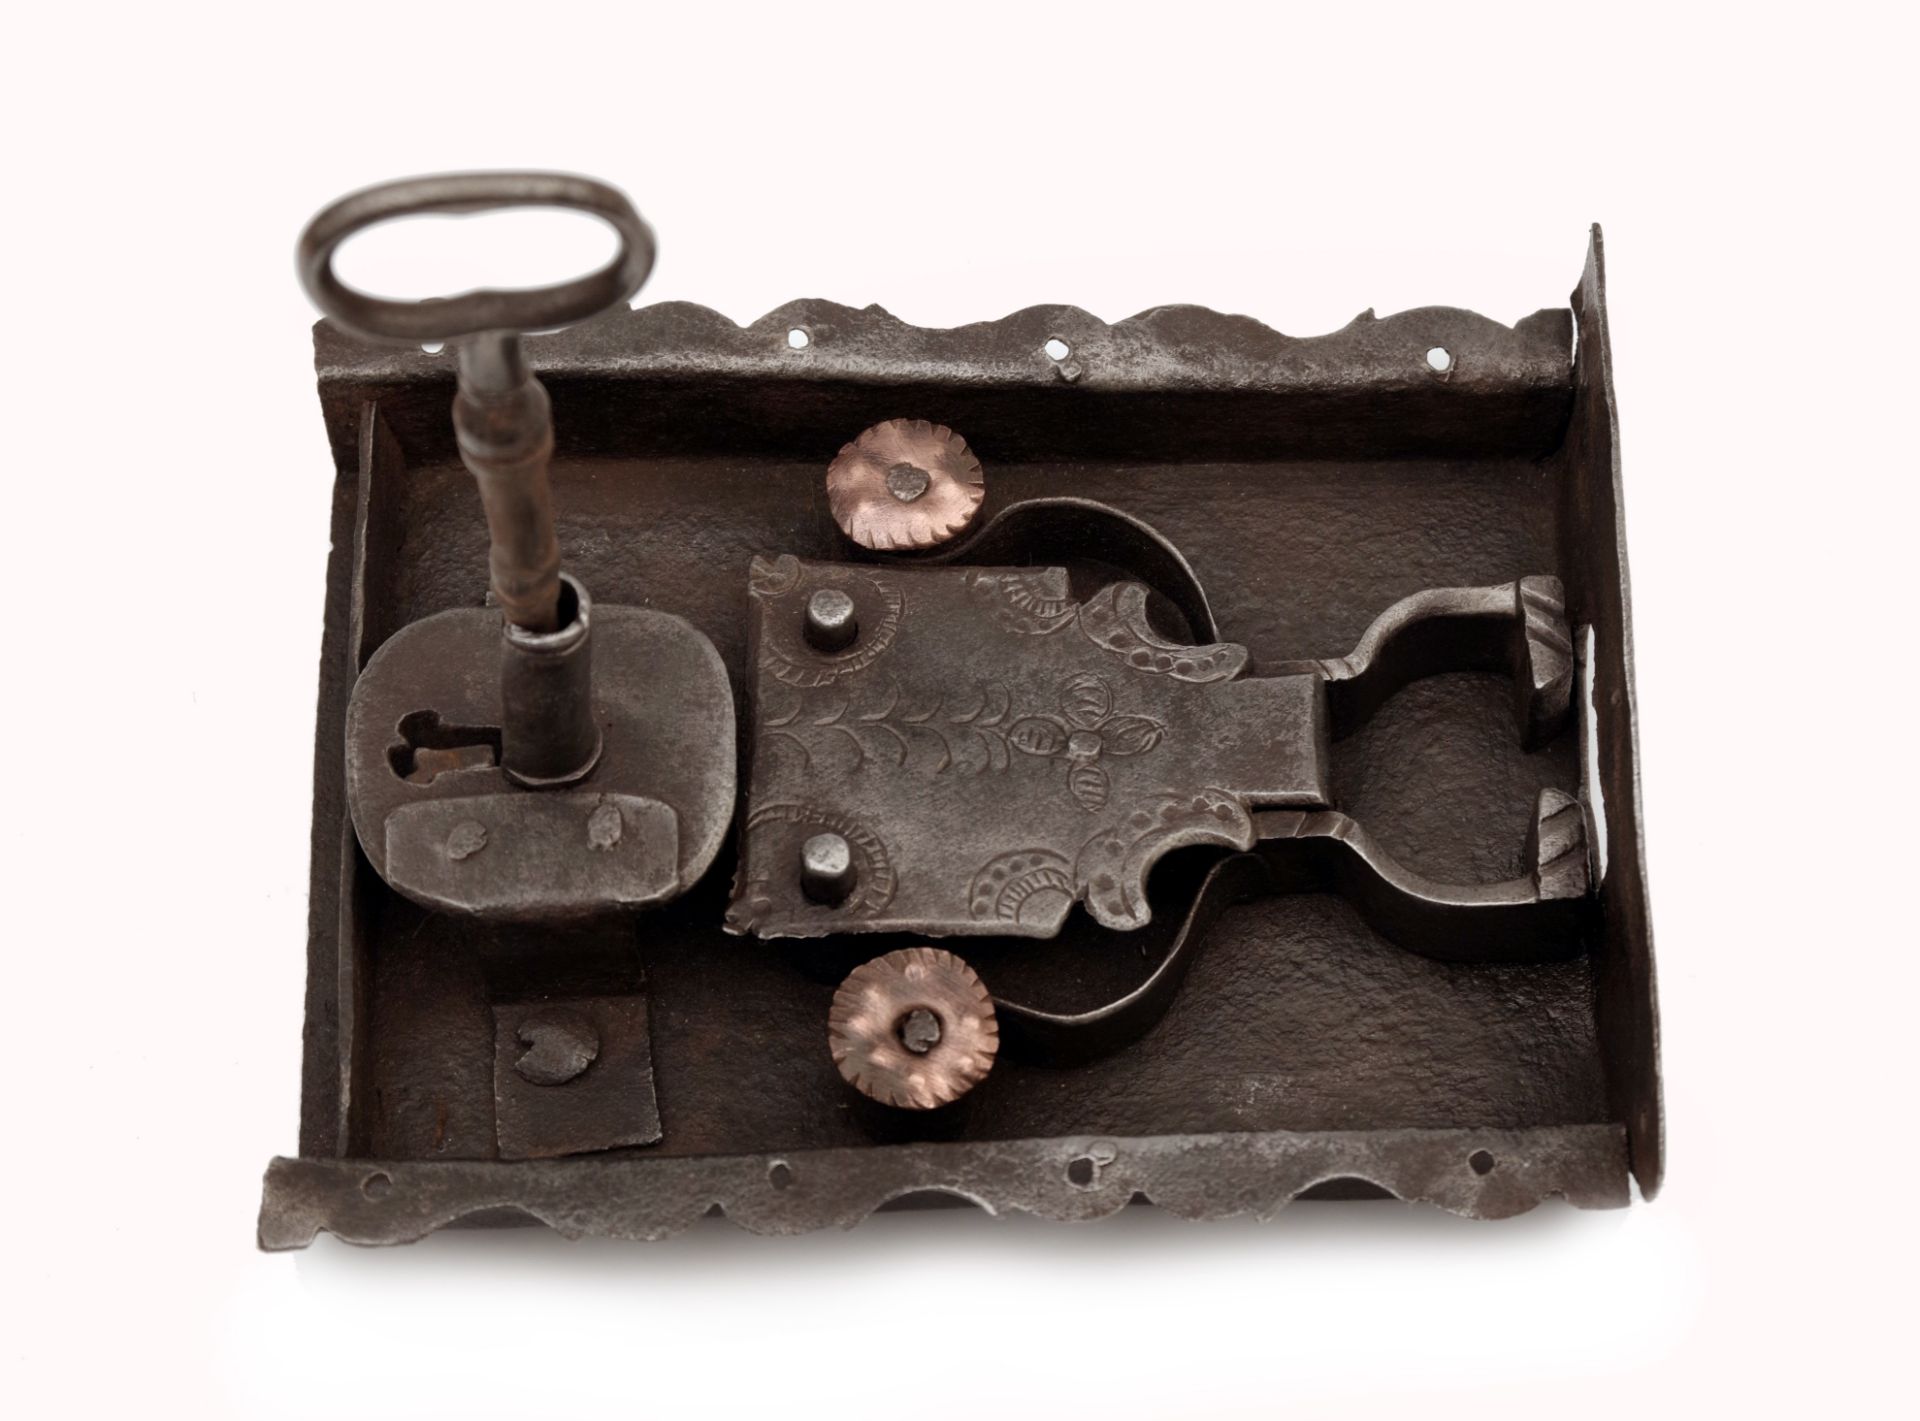 Gothic chest lock with key - Image 2 of 3